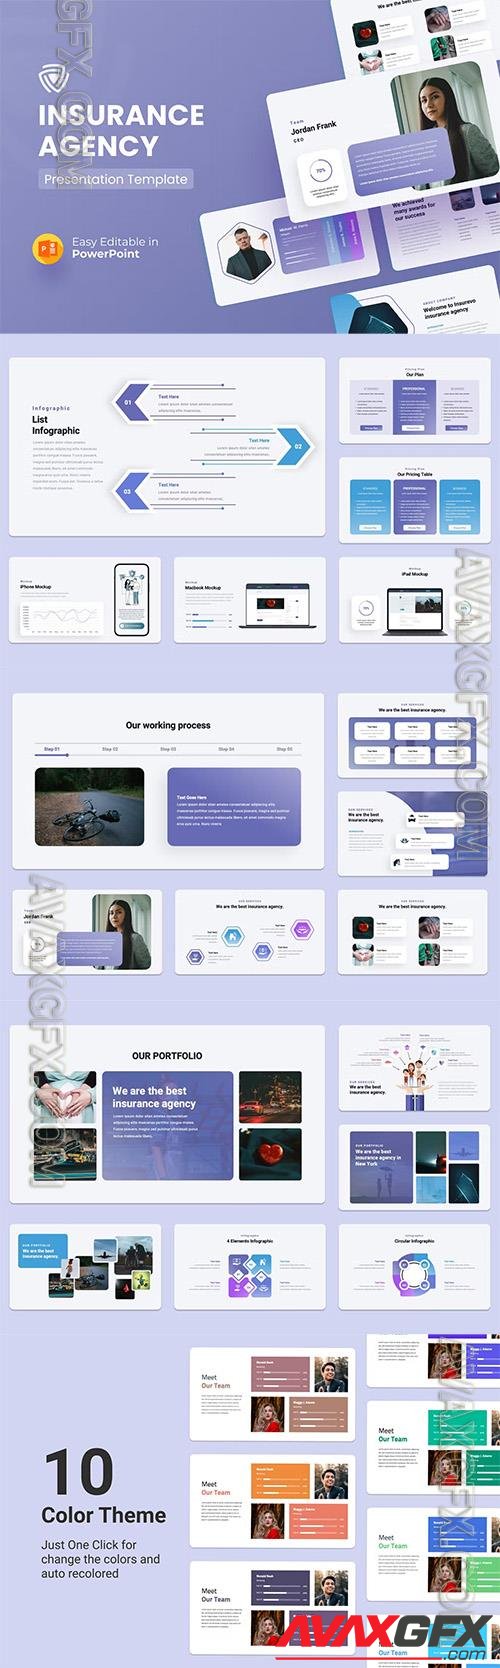 Insurance Agency PowerPoint Presentation Template FH6LBRY